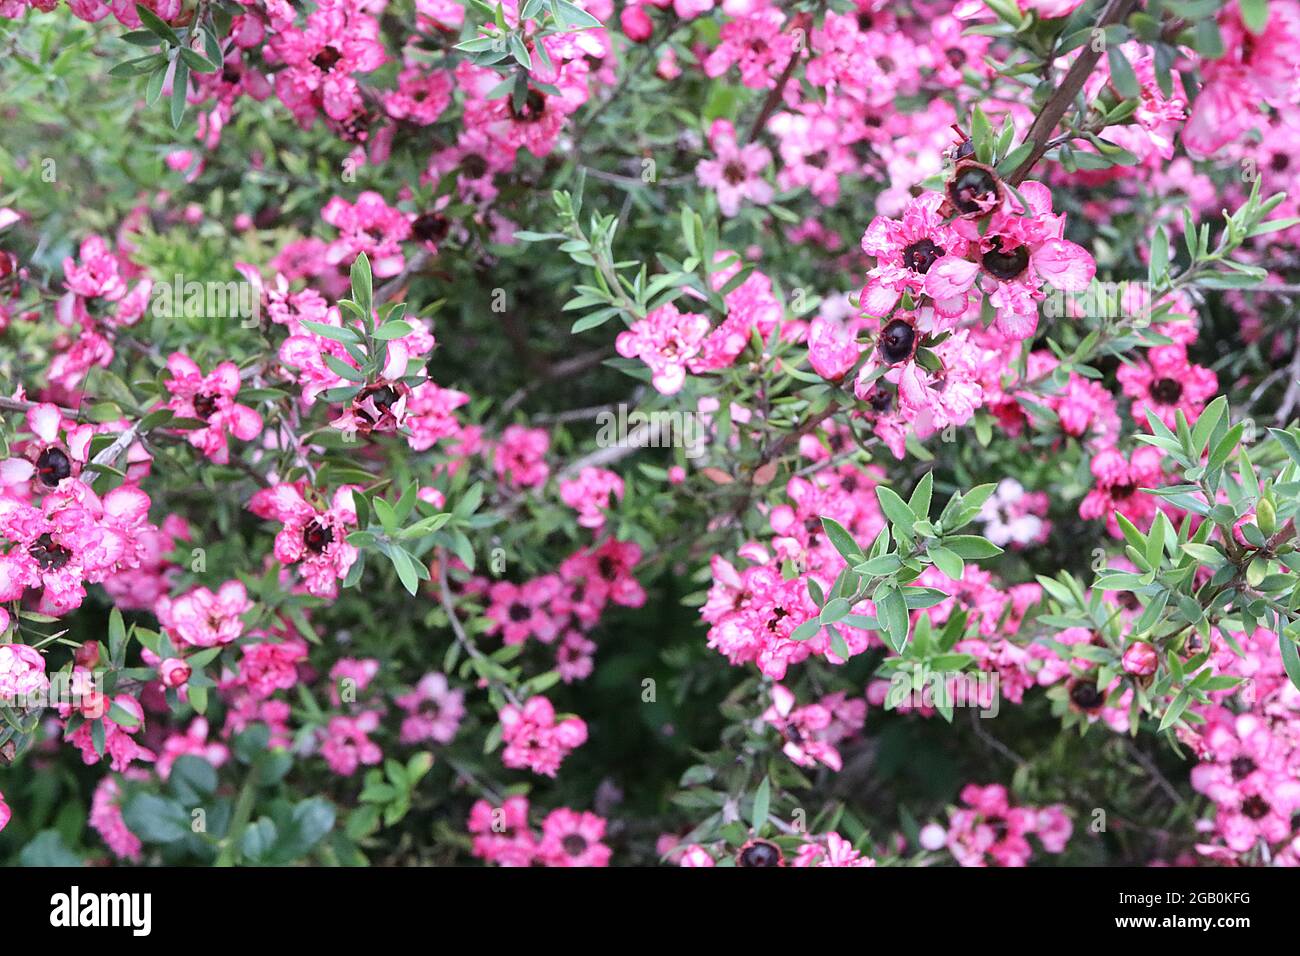 Leptospermum scoparium ‘Coral Candy’  Manuka myrtle Coral Candy – small double pink and white flowers and small grey green leaves,  June, England, UK Stock Photo